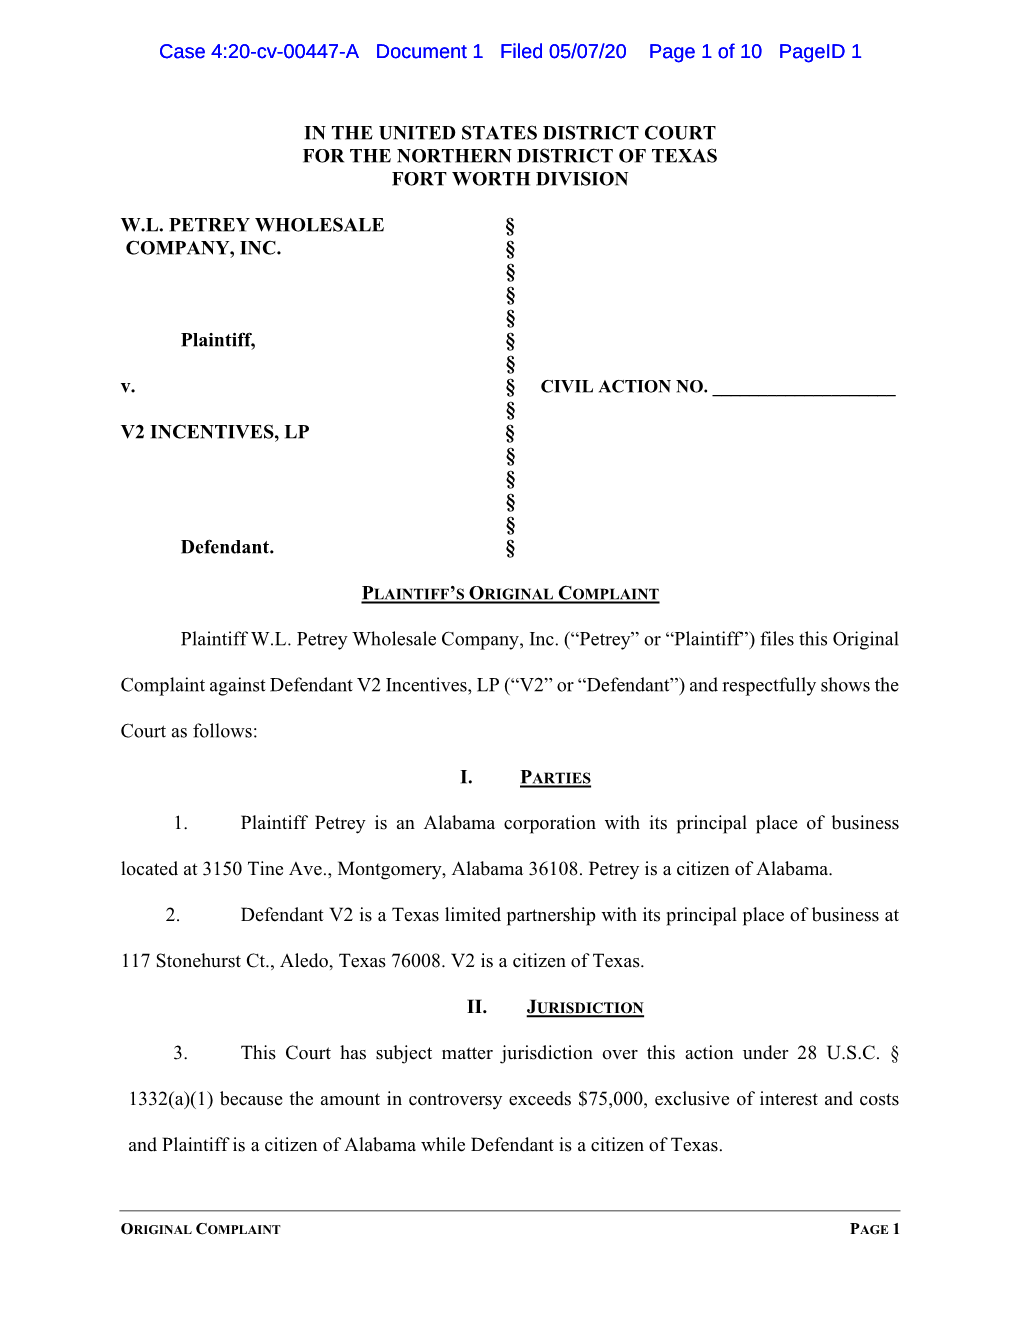 05/19/2020 Amended Complaint